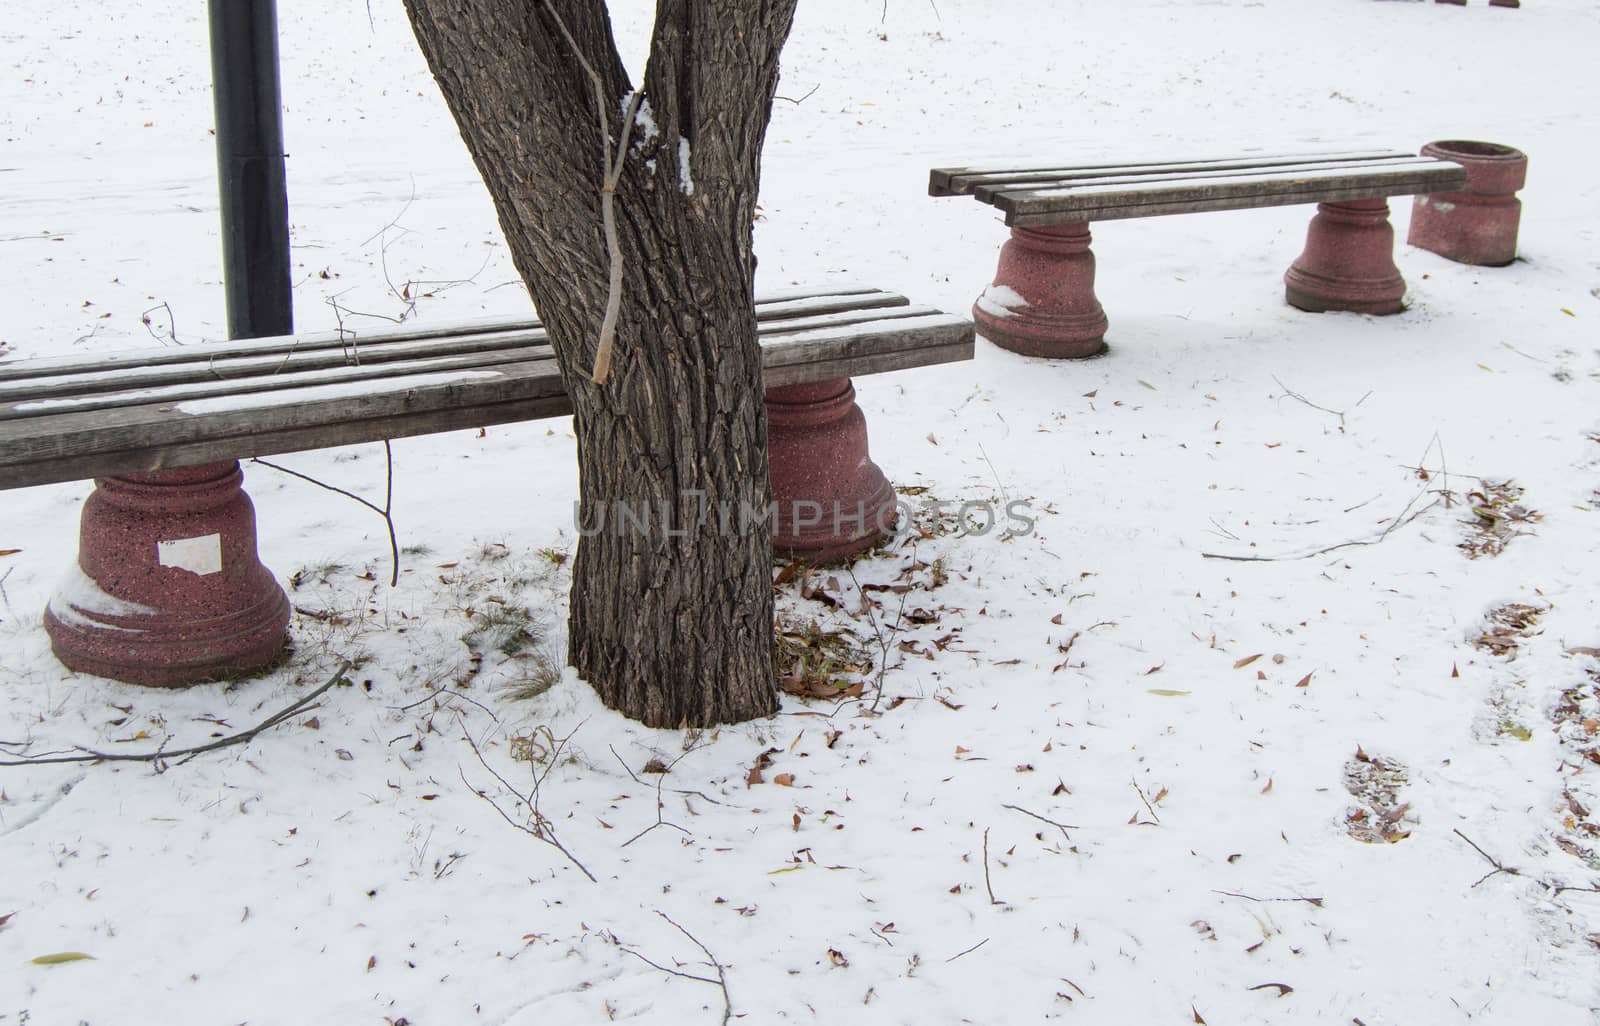 Several wooden benches in the winter city Park, the first snow.